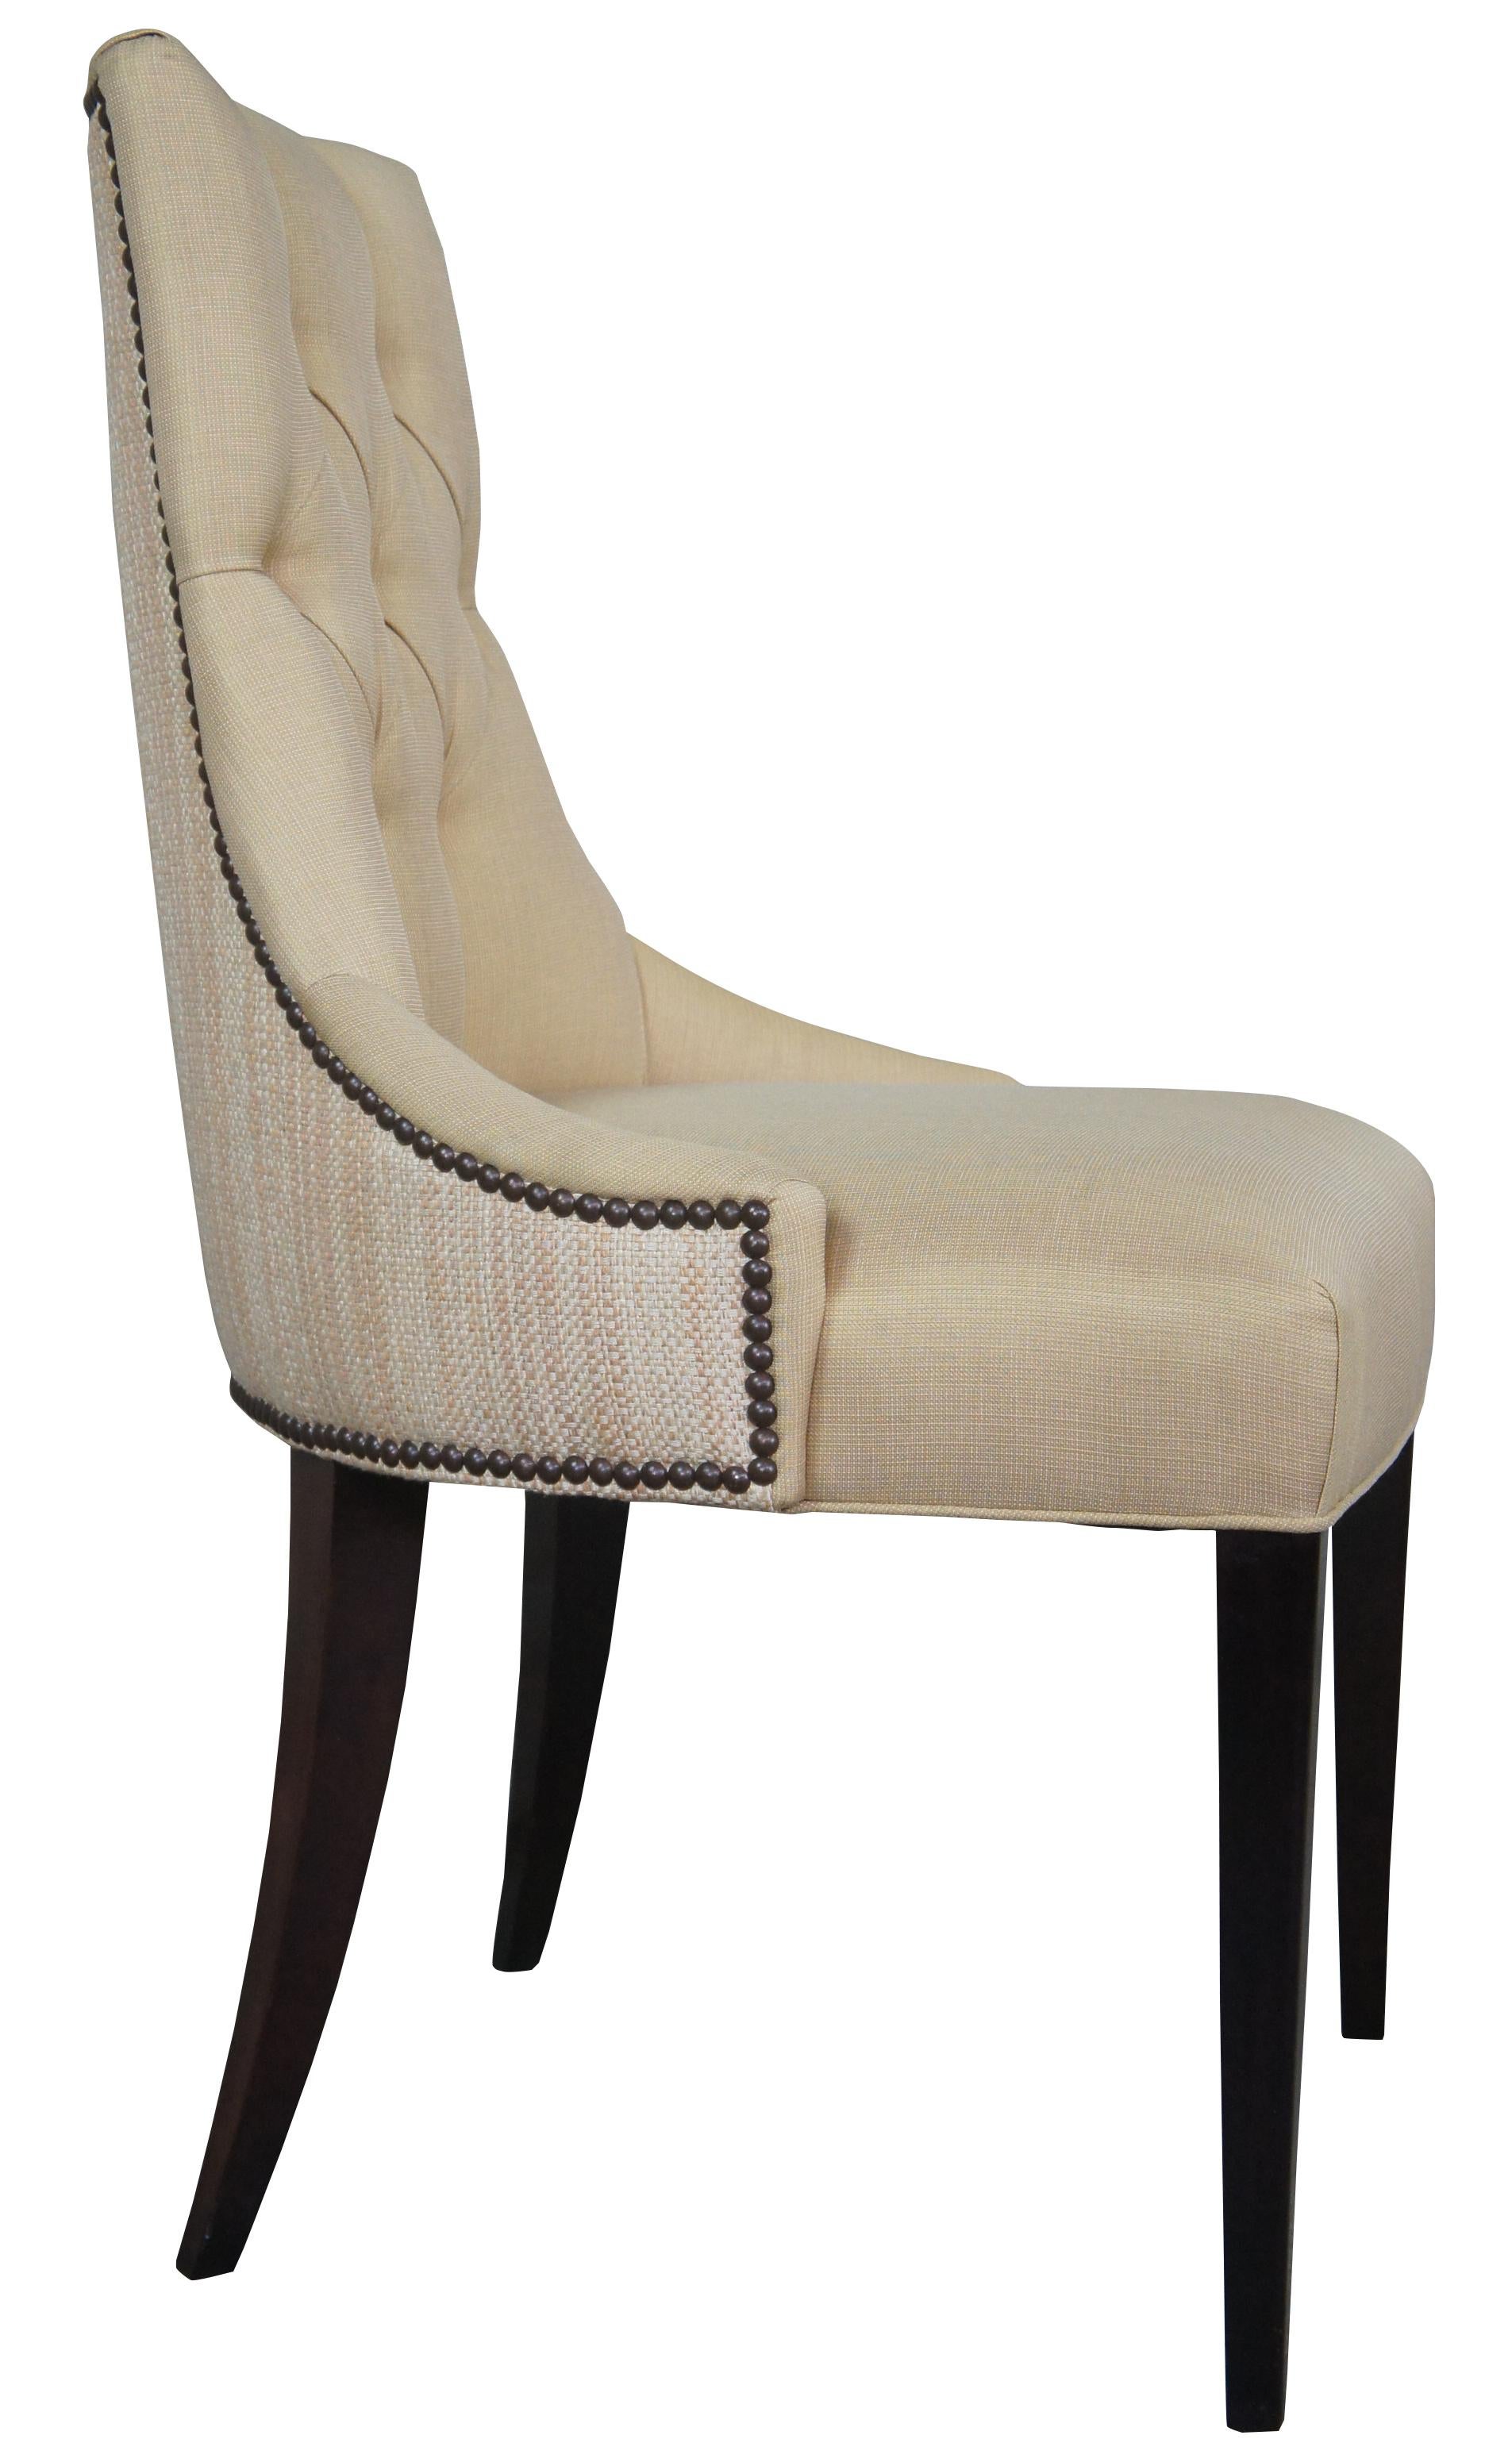 Empire Revival 6 Baker Thomas Pheasant Tufted Ritz Dining Chairs Modern Empire Style BA7841